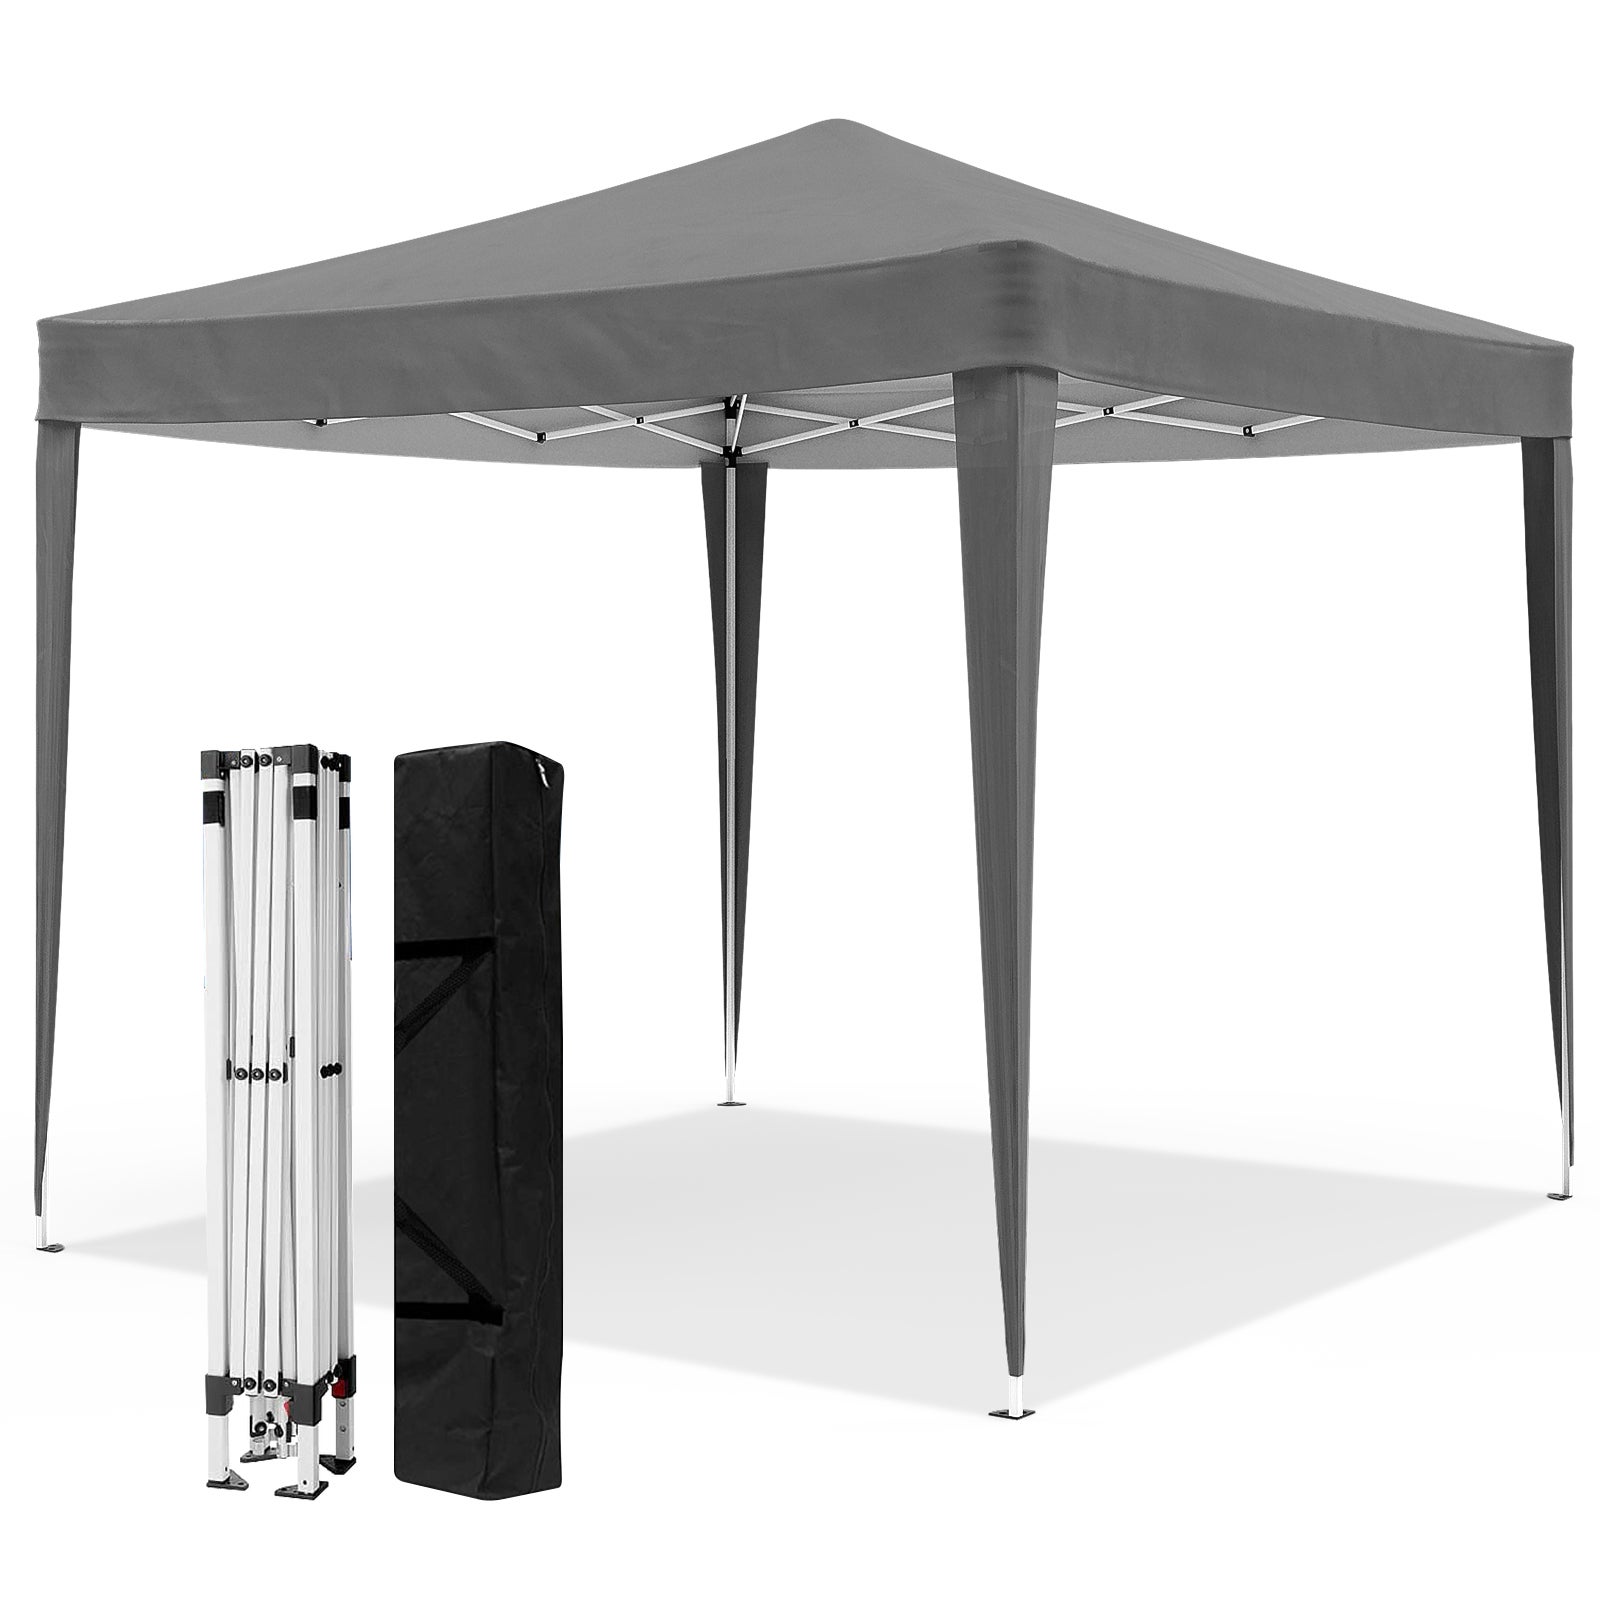 Advwin Marquee Tent 2x2m Outdoor Gazebos Canopy Camping (Grey)